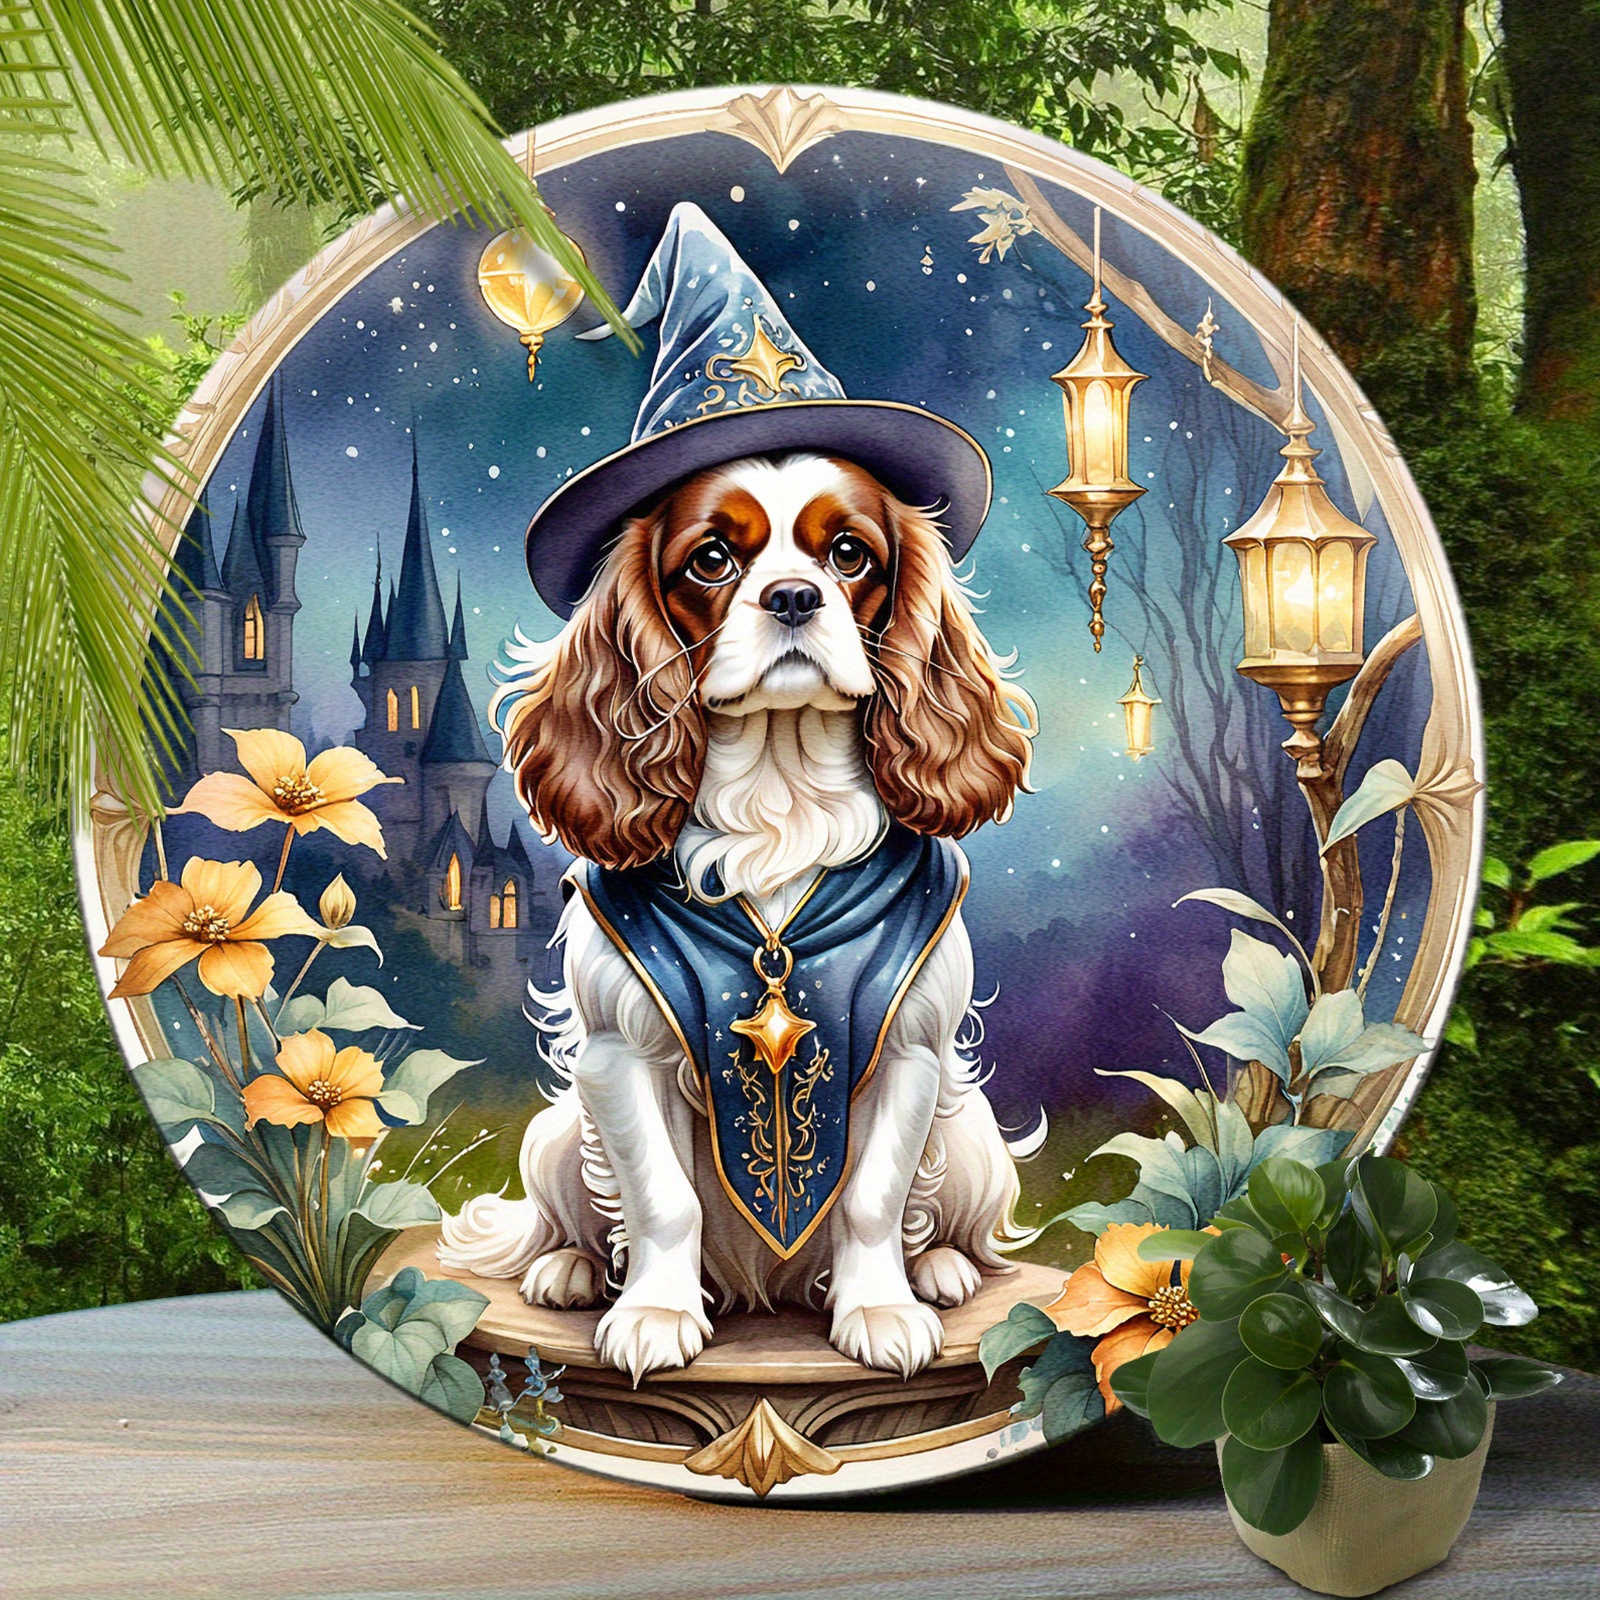 

1pc 8x8 Inch (20x20cm) Round Aluminum Sign Charles Spaniel Vintage Round Aluminum Sign, Cute Dog Sign For Cafe Kitchen Club Bar Home Wall Art & Decor Gift